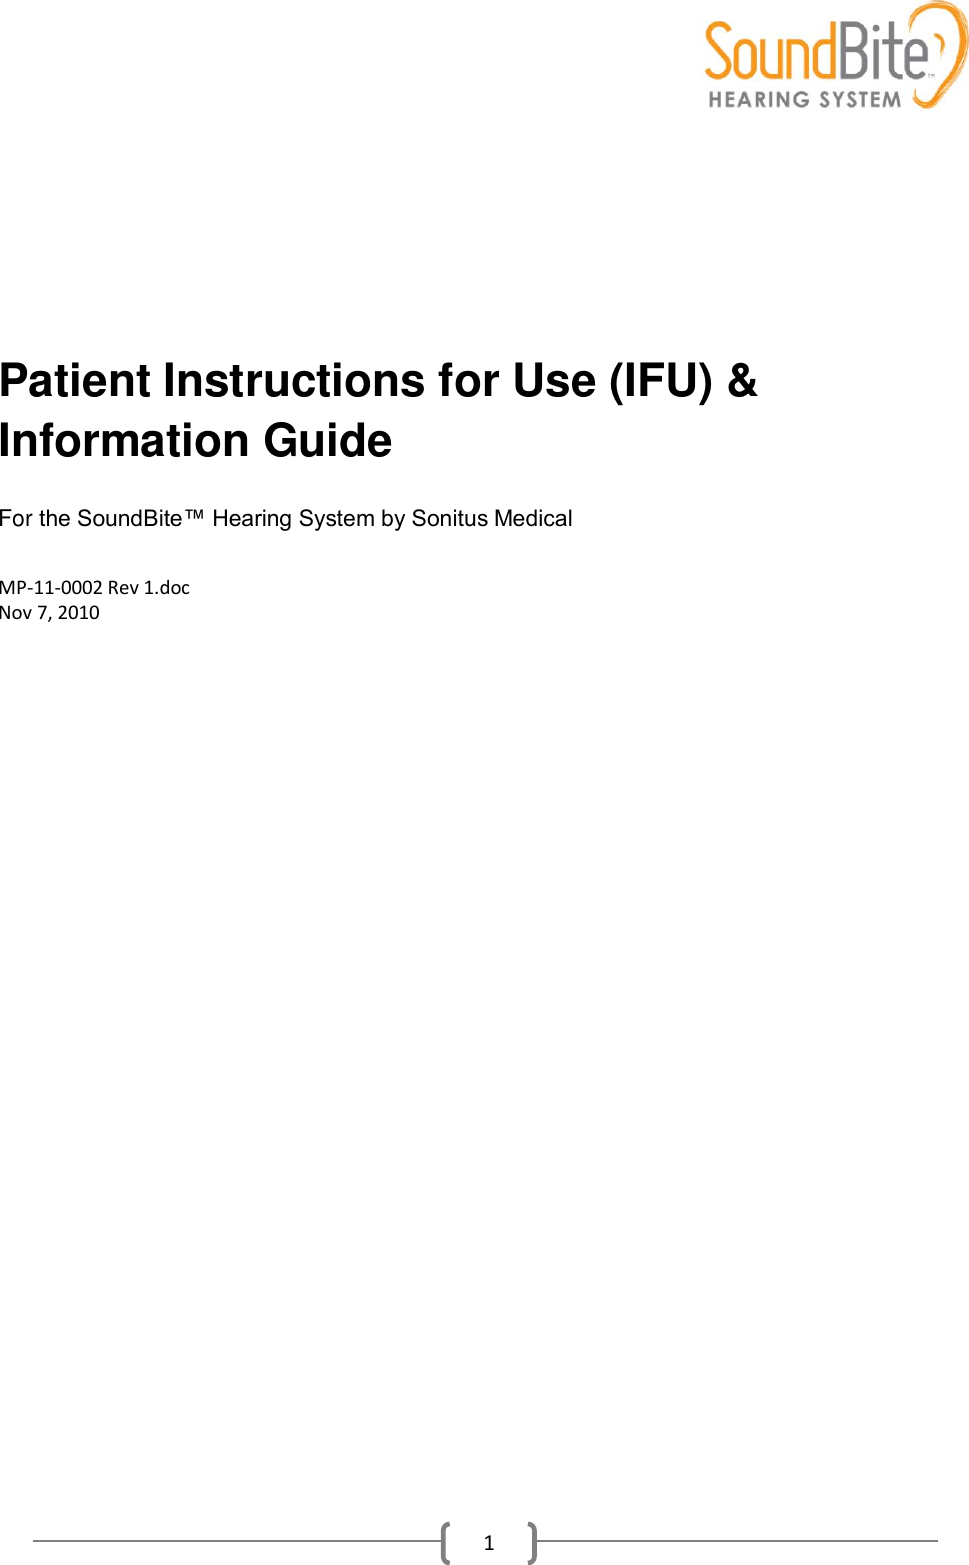    1     Patient Instructions for Use (IFU) &amp; Information Guide   For the SoundBite™ Hearing System by Sonitus Medical  MP-11-0002 Rev 1.doc  Nov 7, 2010  